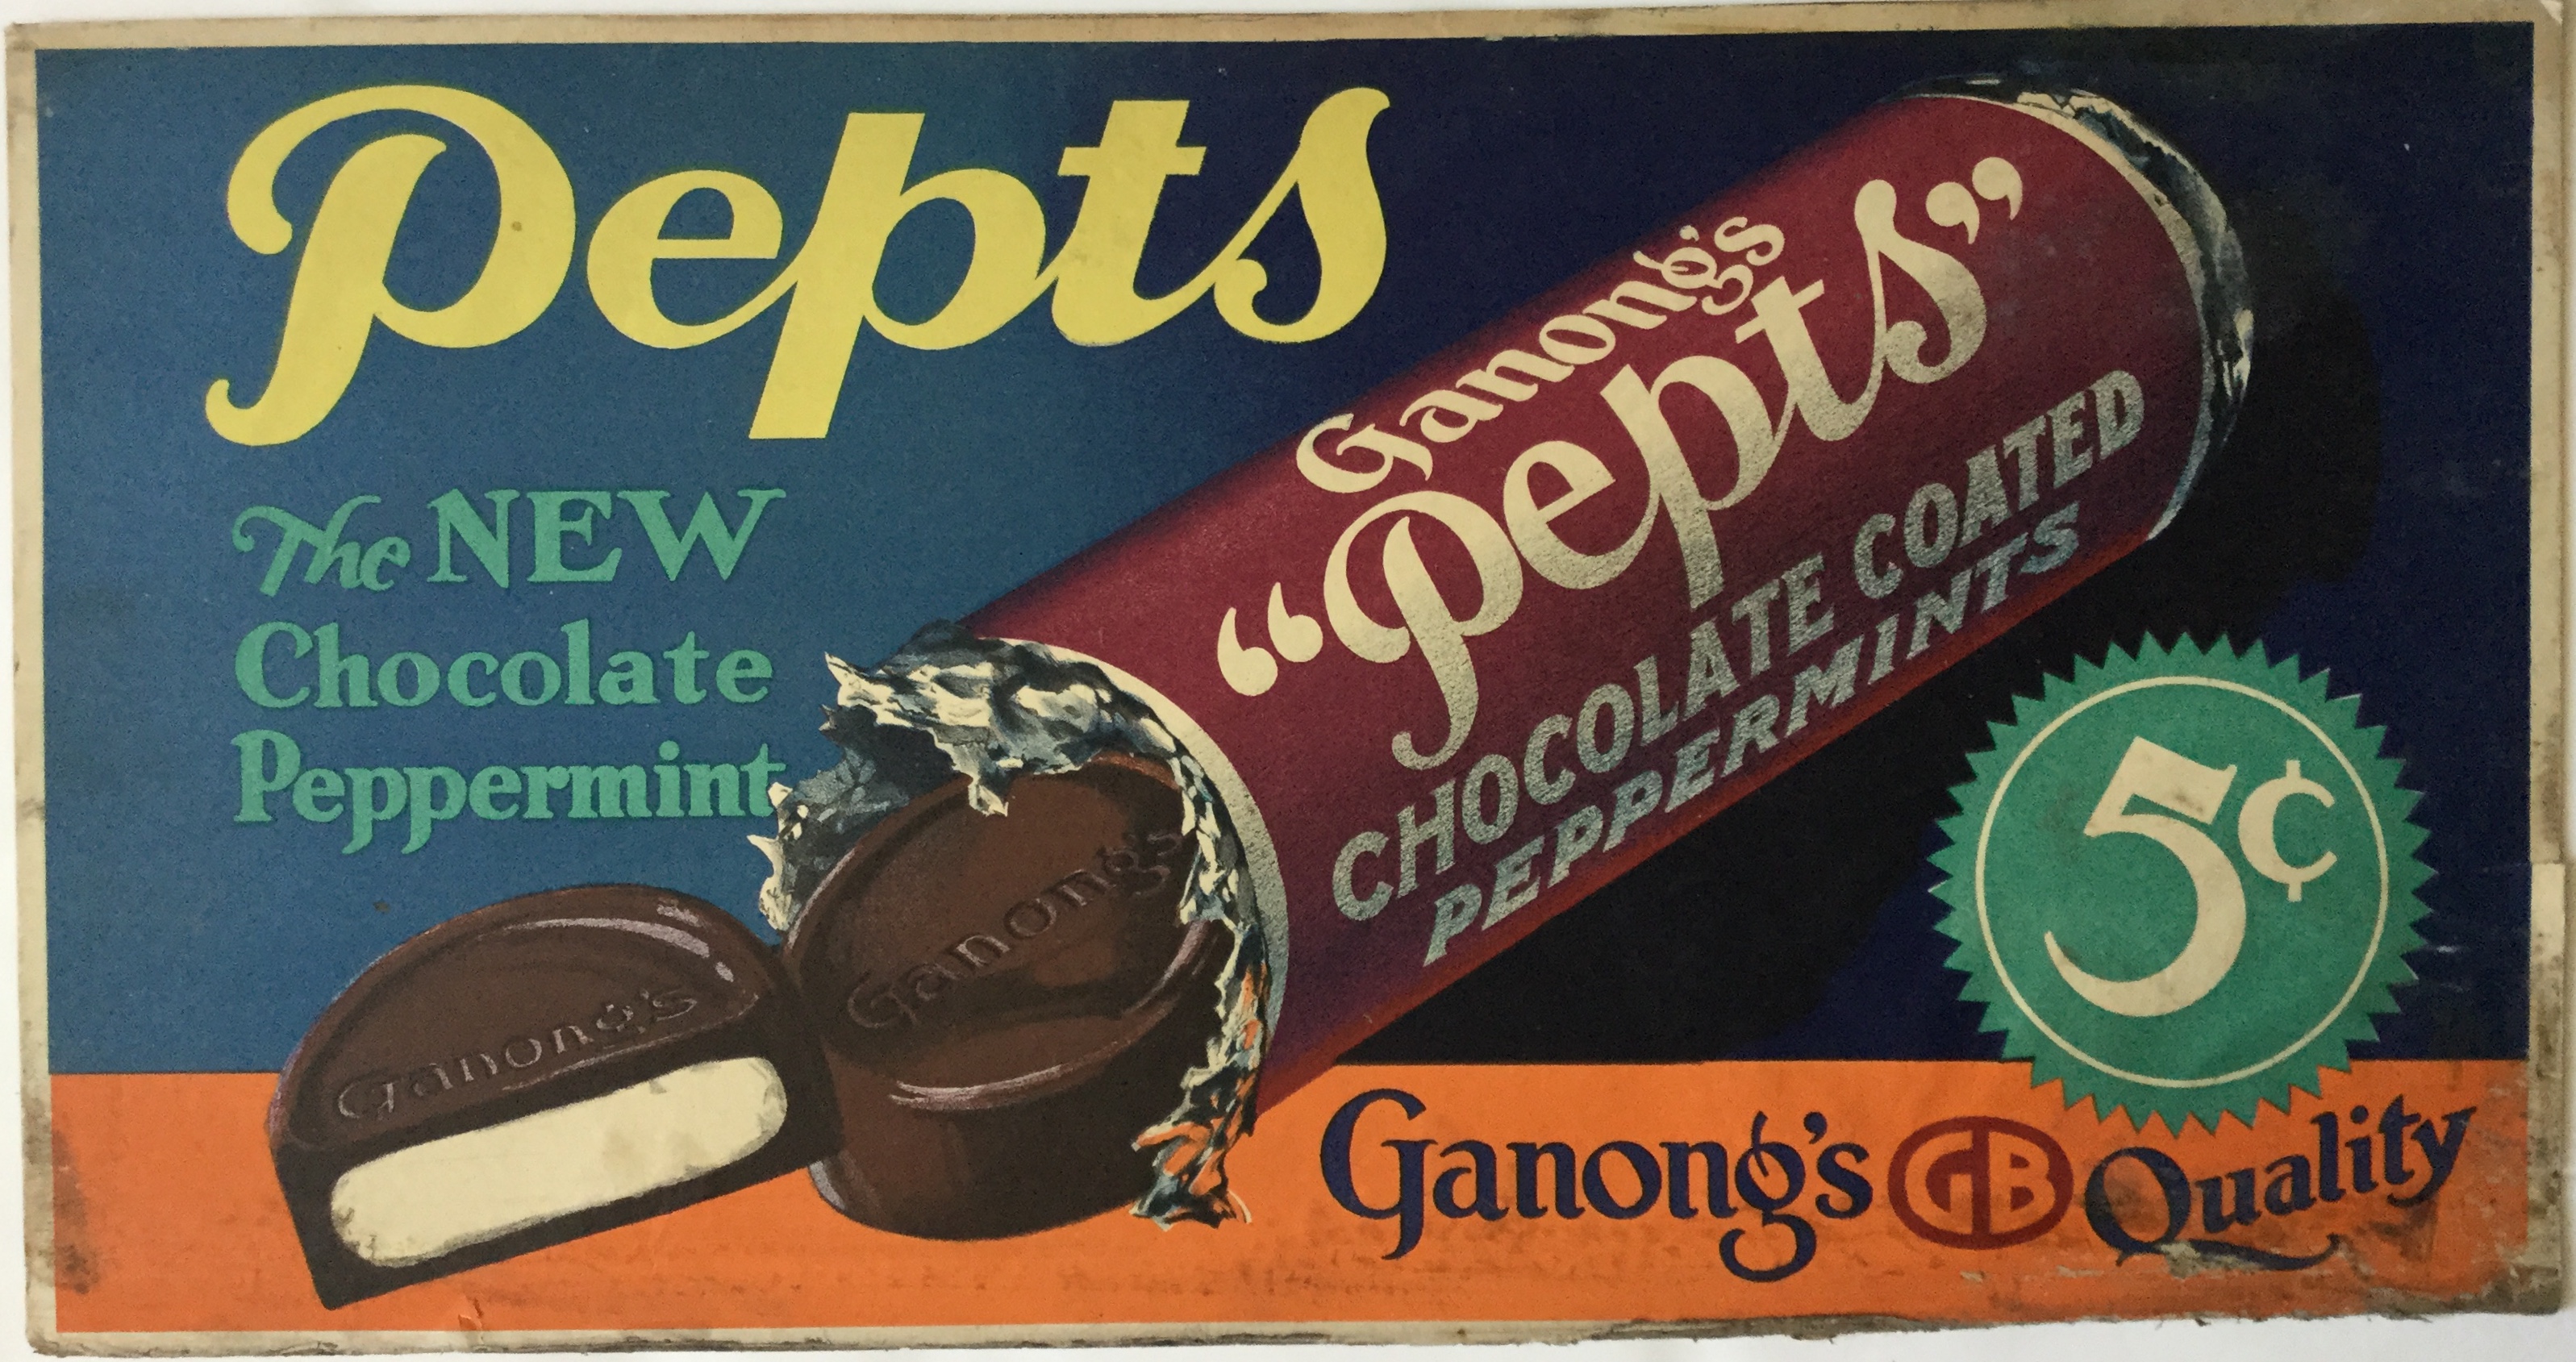 J398	PEPTS CHOCOLATE COATED PEPPERMINTS - 5 CENTS GANONG’S QUALITY